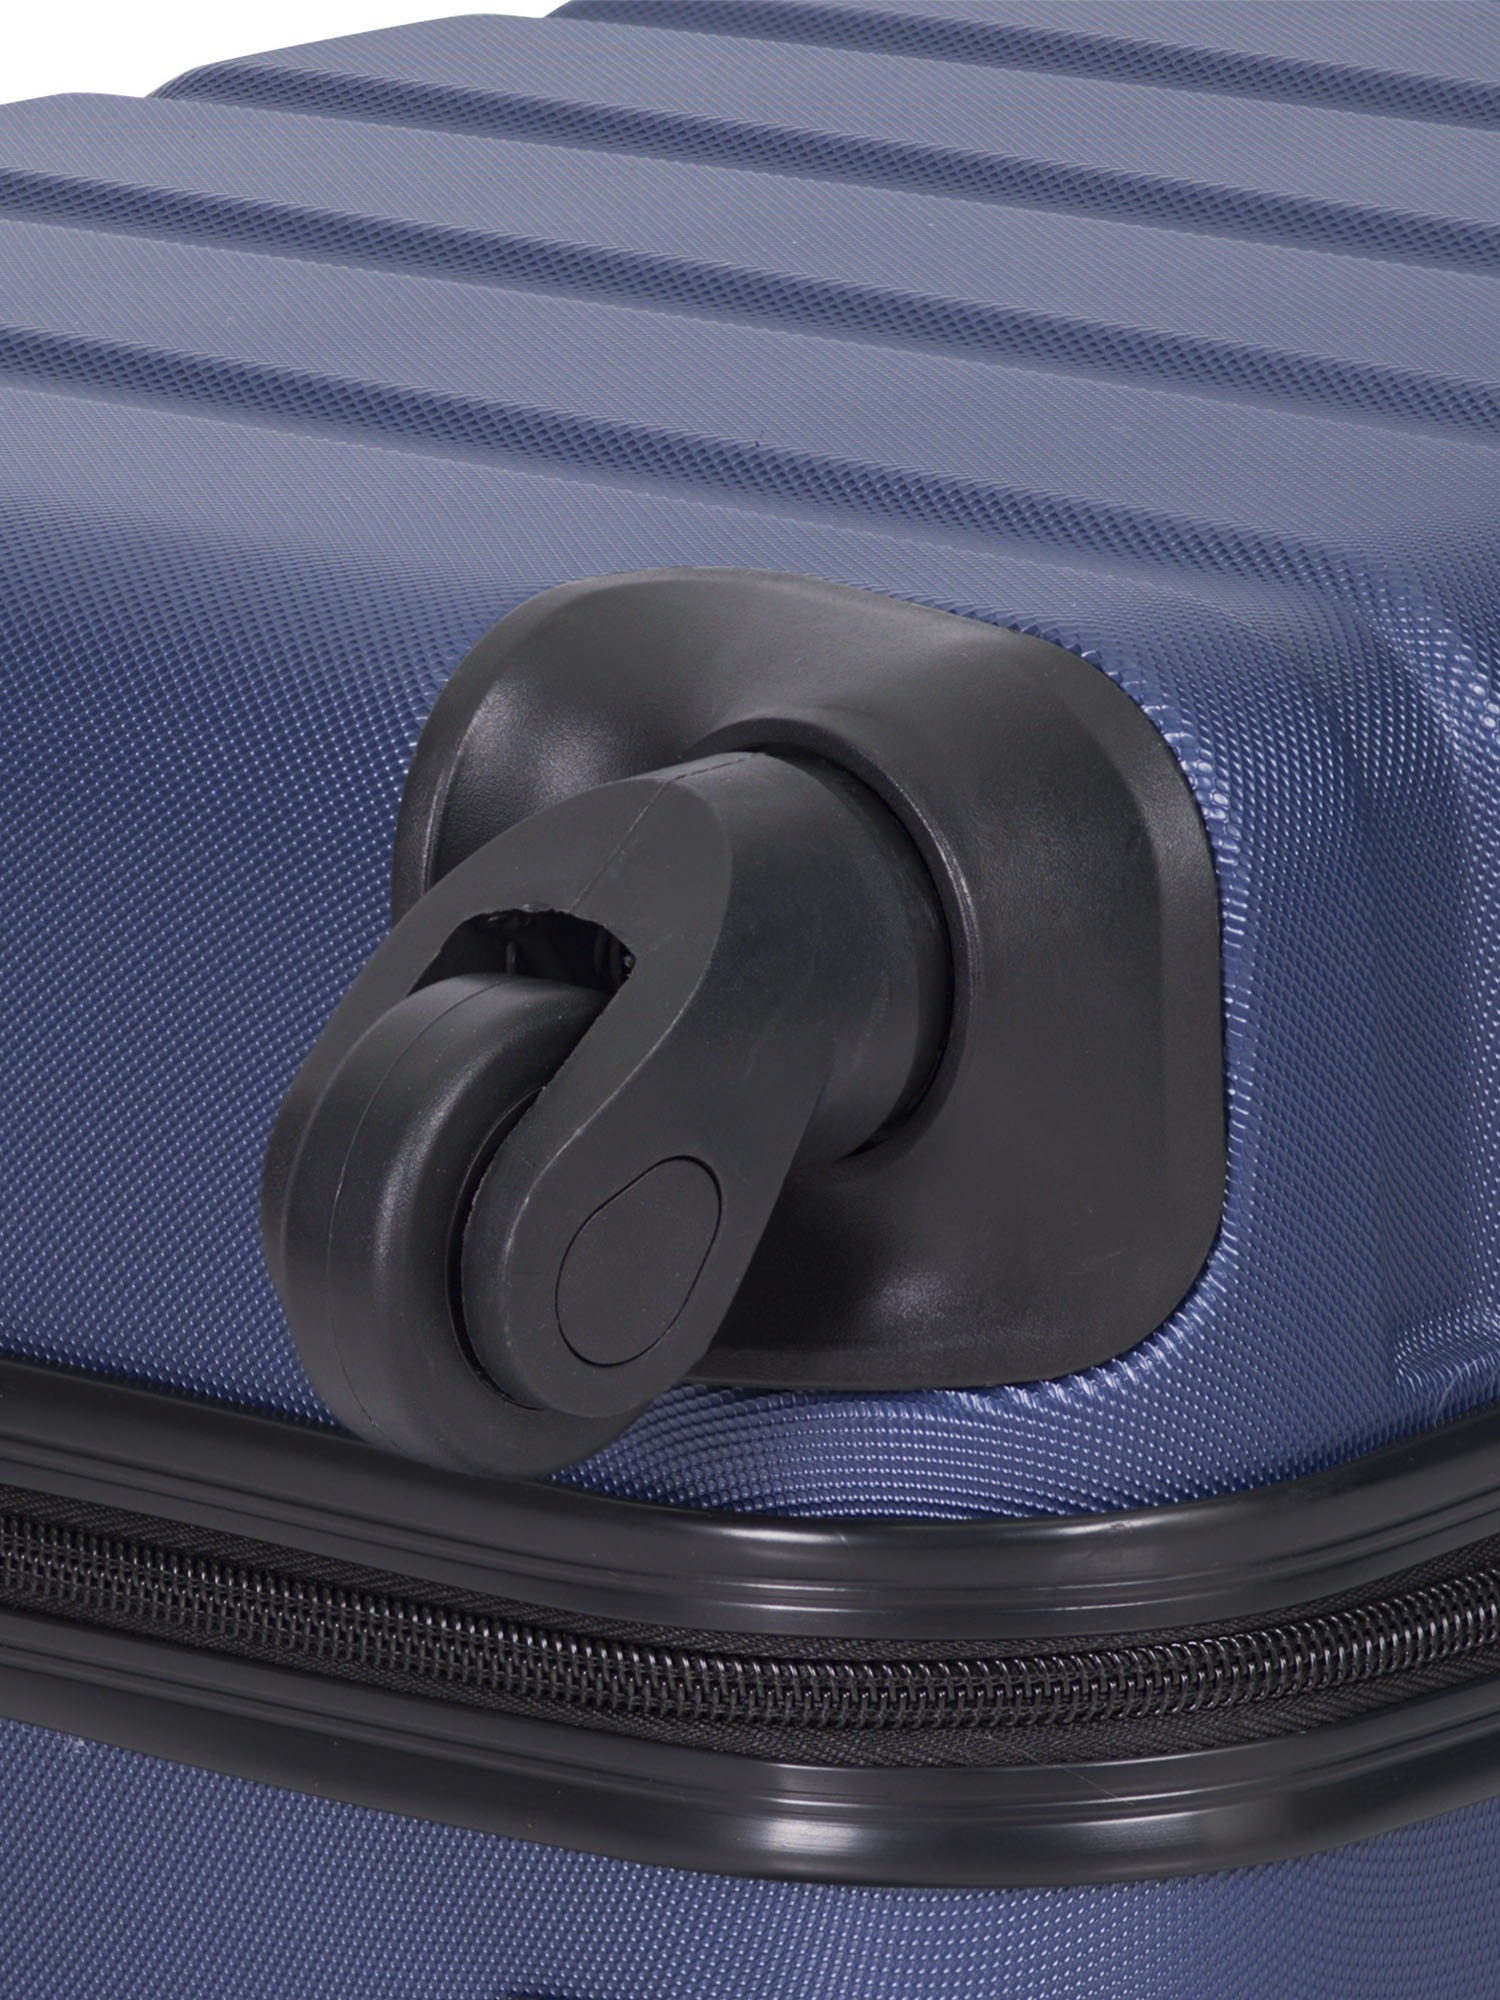 Wrangler 20” Carry-On Rolling Hard side Spinner Luggage - Navy - image 3 of 7